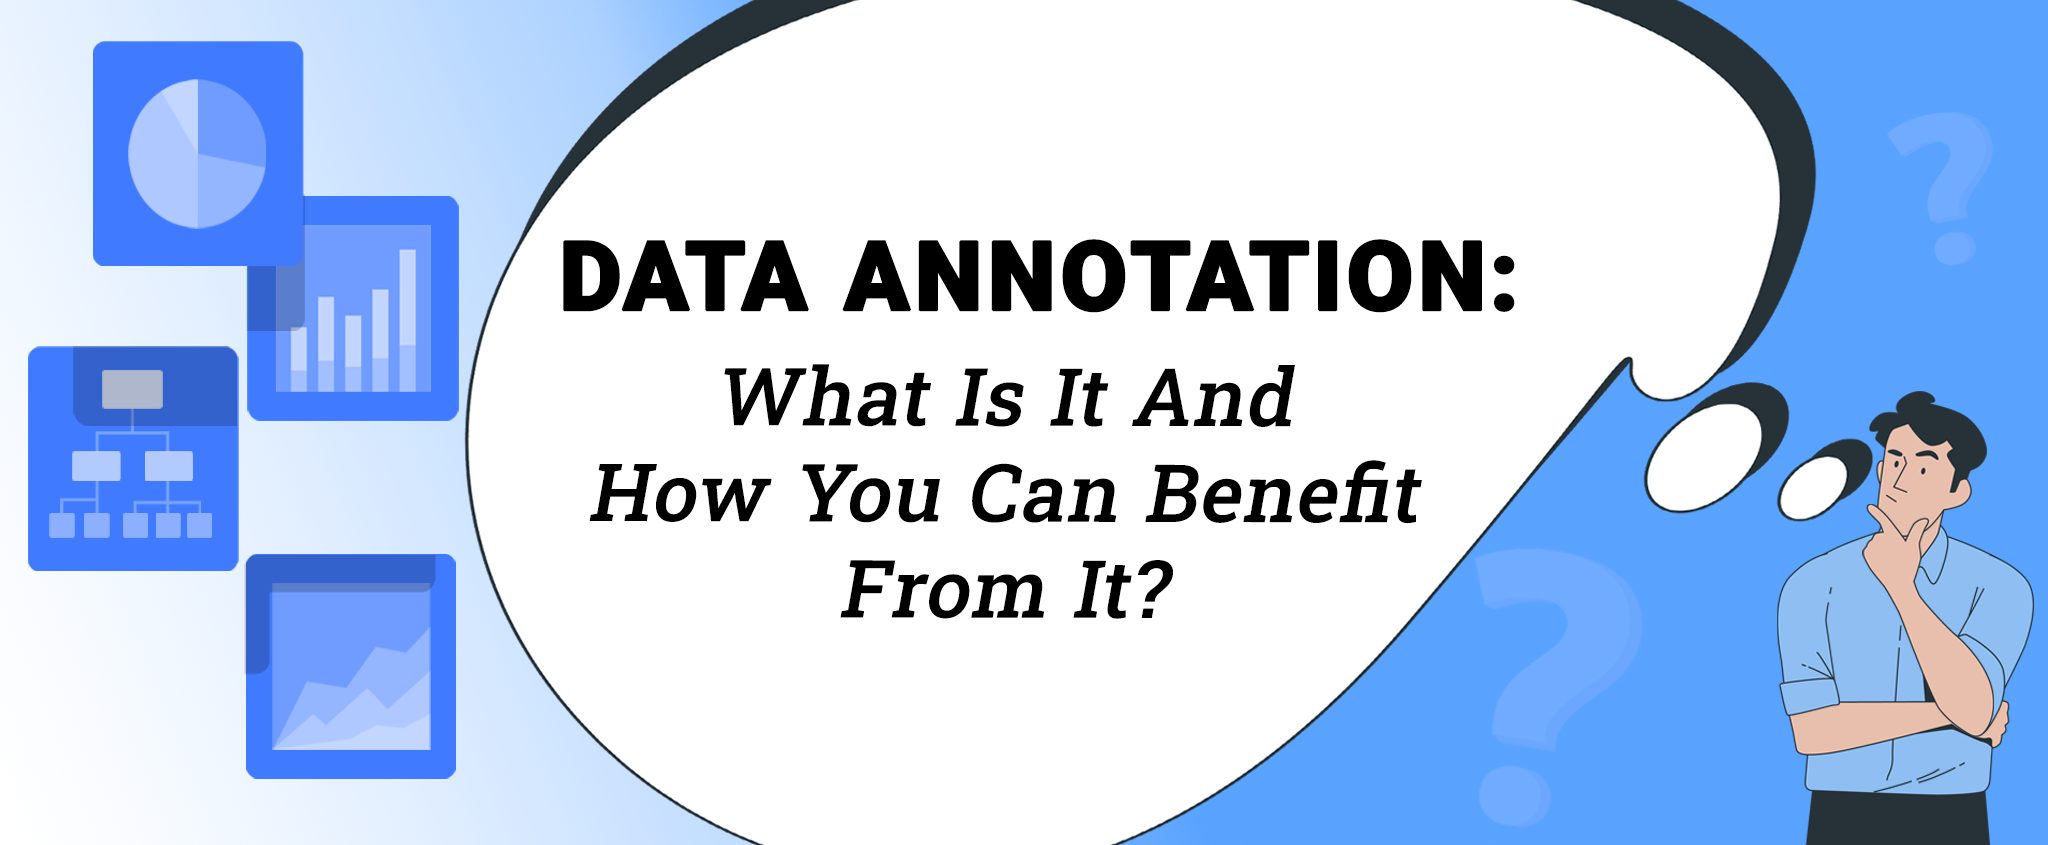 Data Annotation Services_ What Is It And How You Can Benefit From It